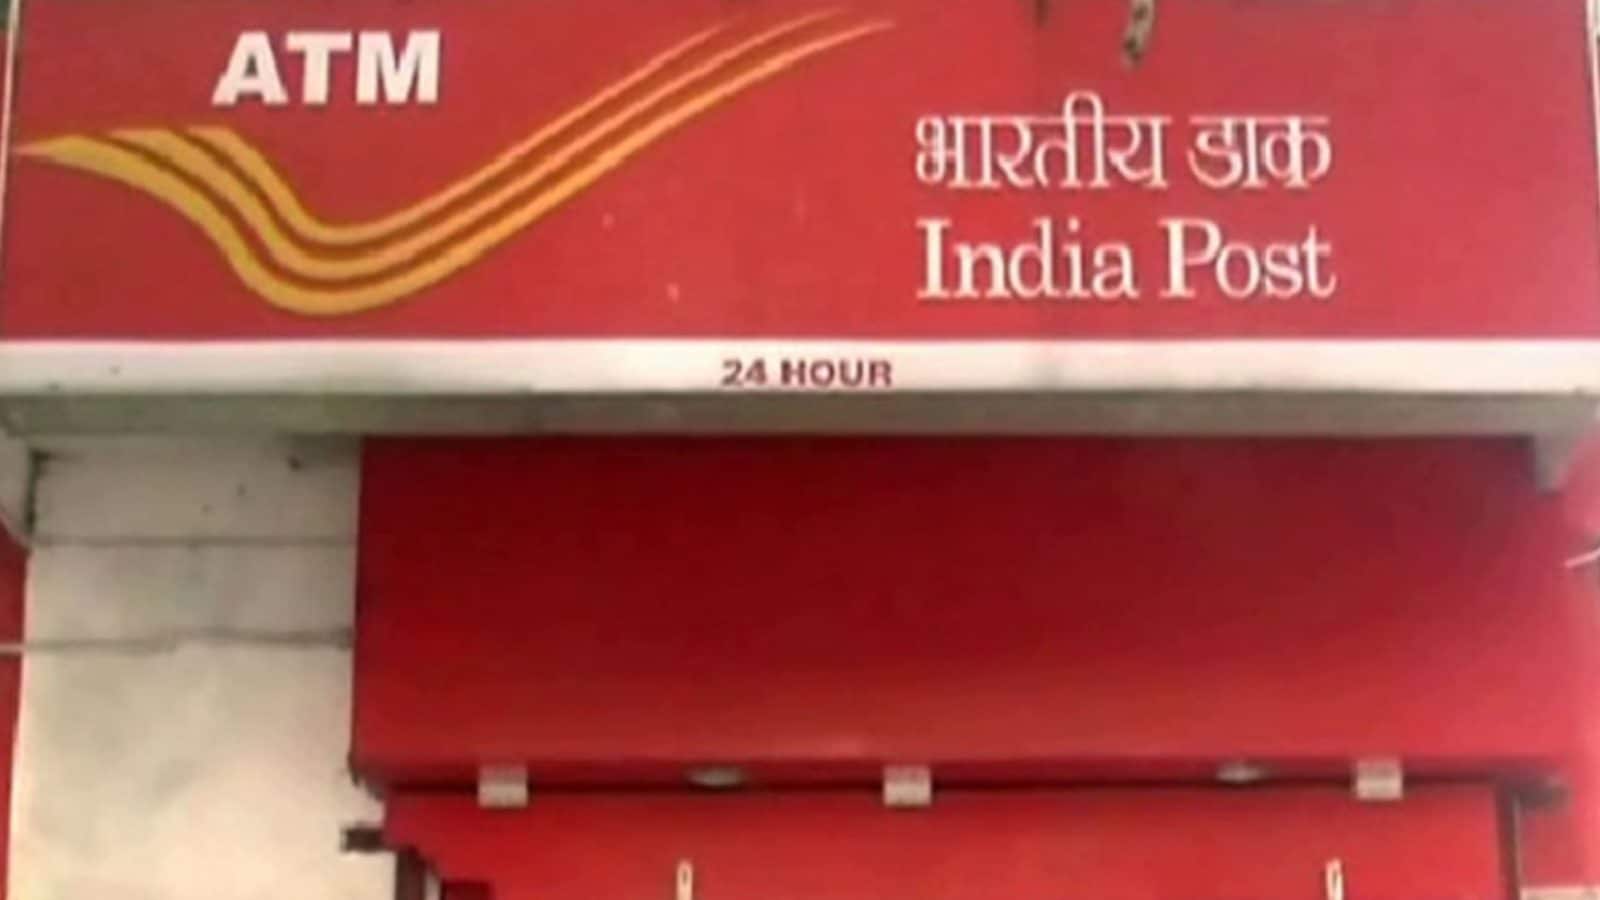 PPF, Post Office Deposit, NSC: Small Savings Schemes Become Attractive With Up To 8% Returns